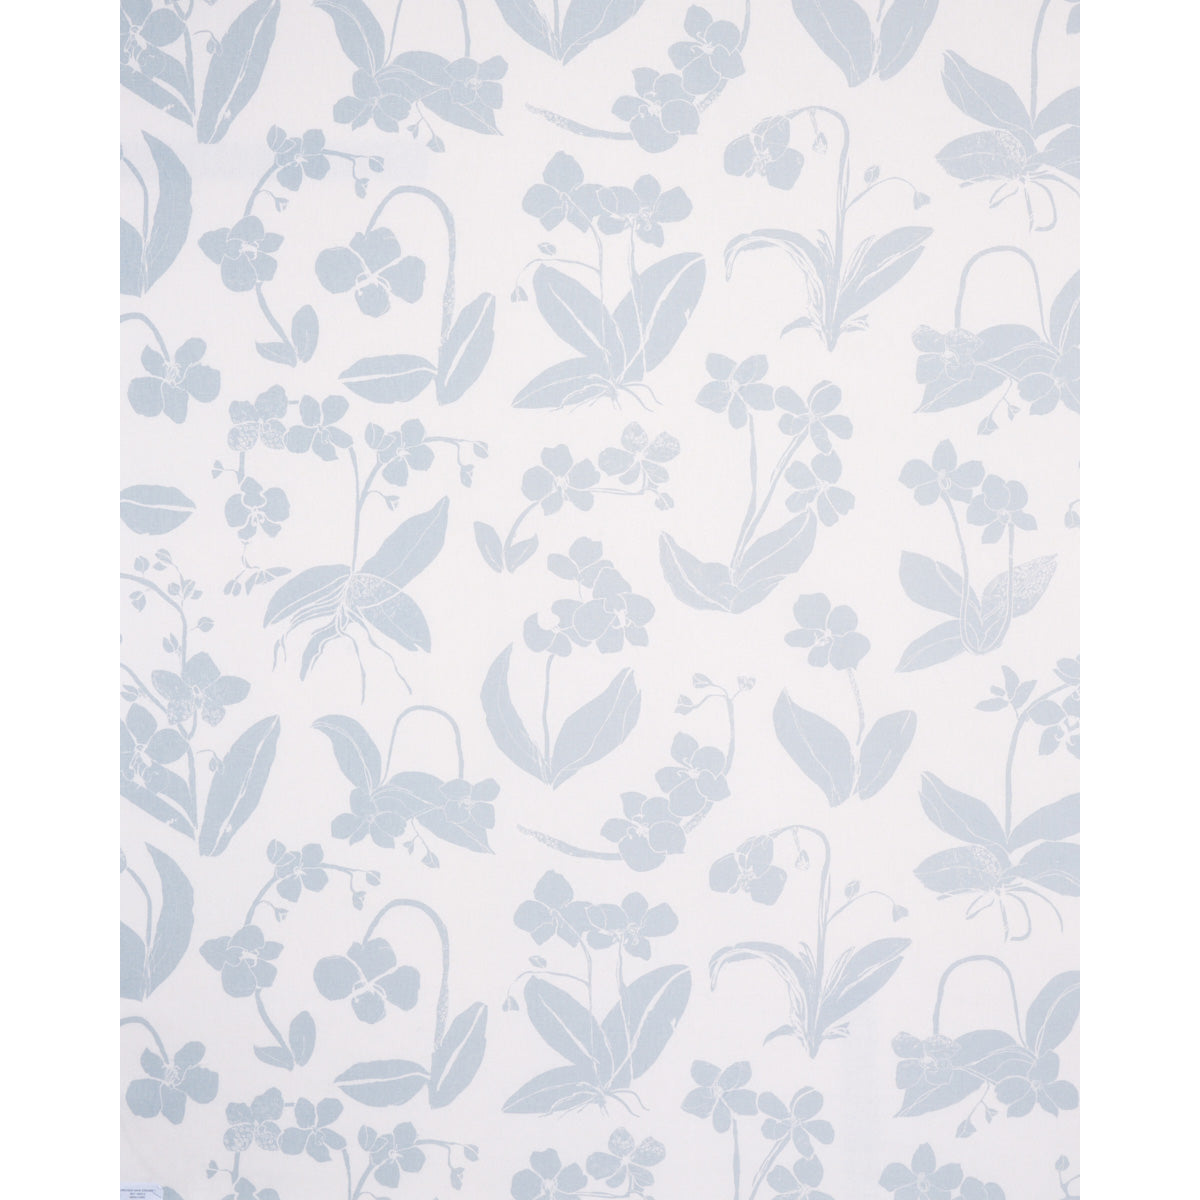 Purchase 180512 Orchids Have Dreams, Sky by Schumacher Fabric 1